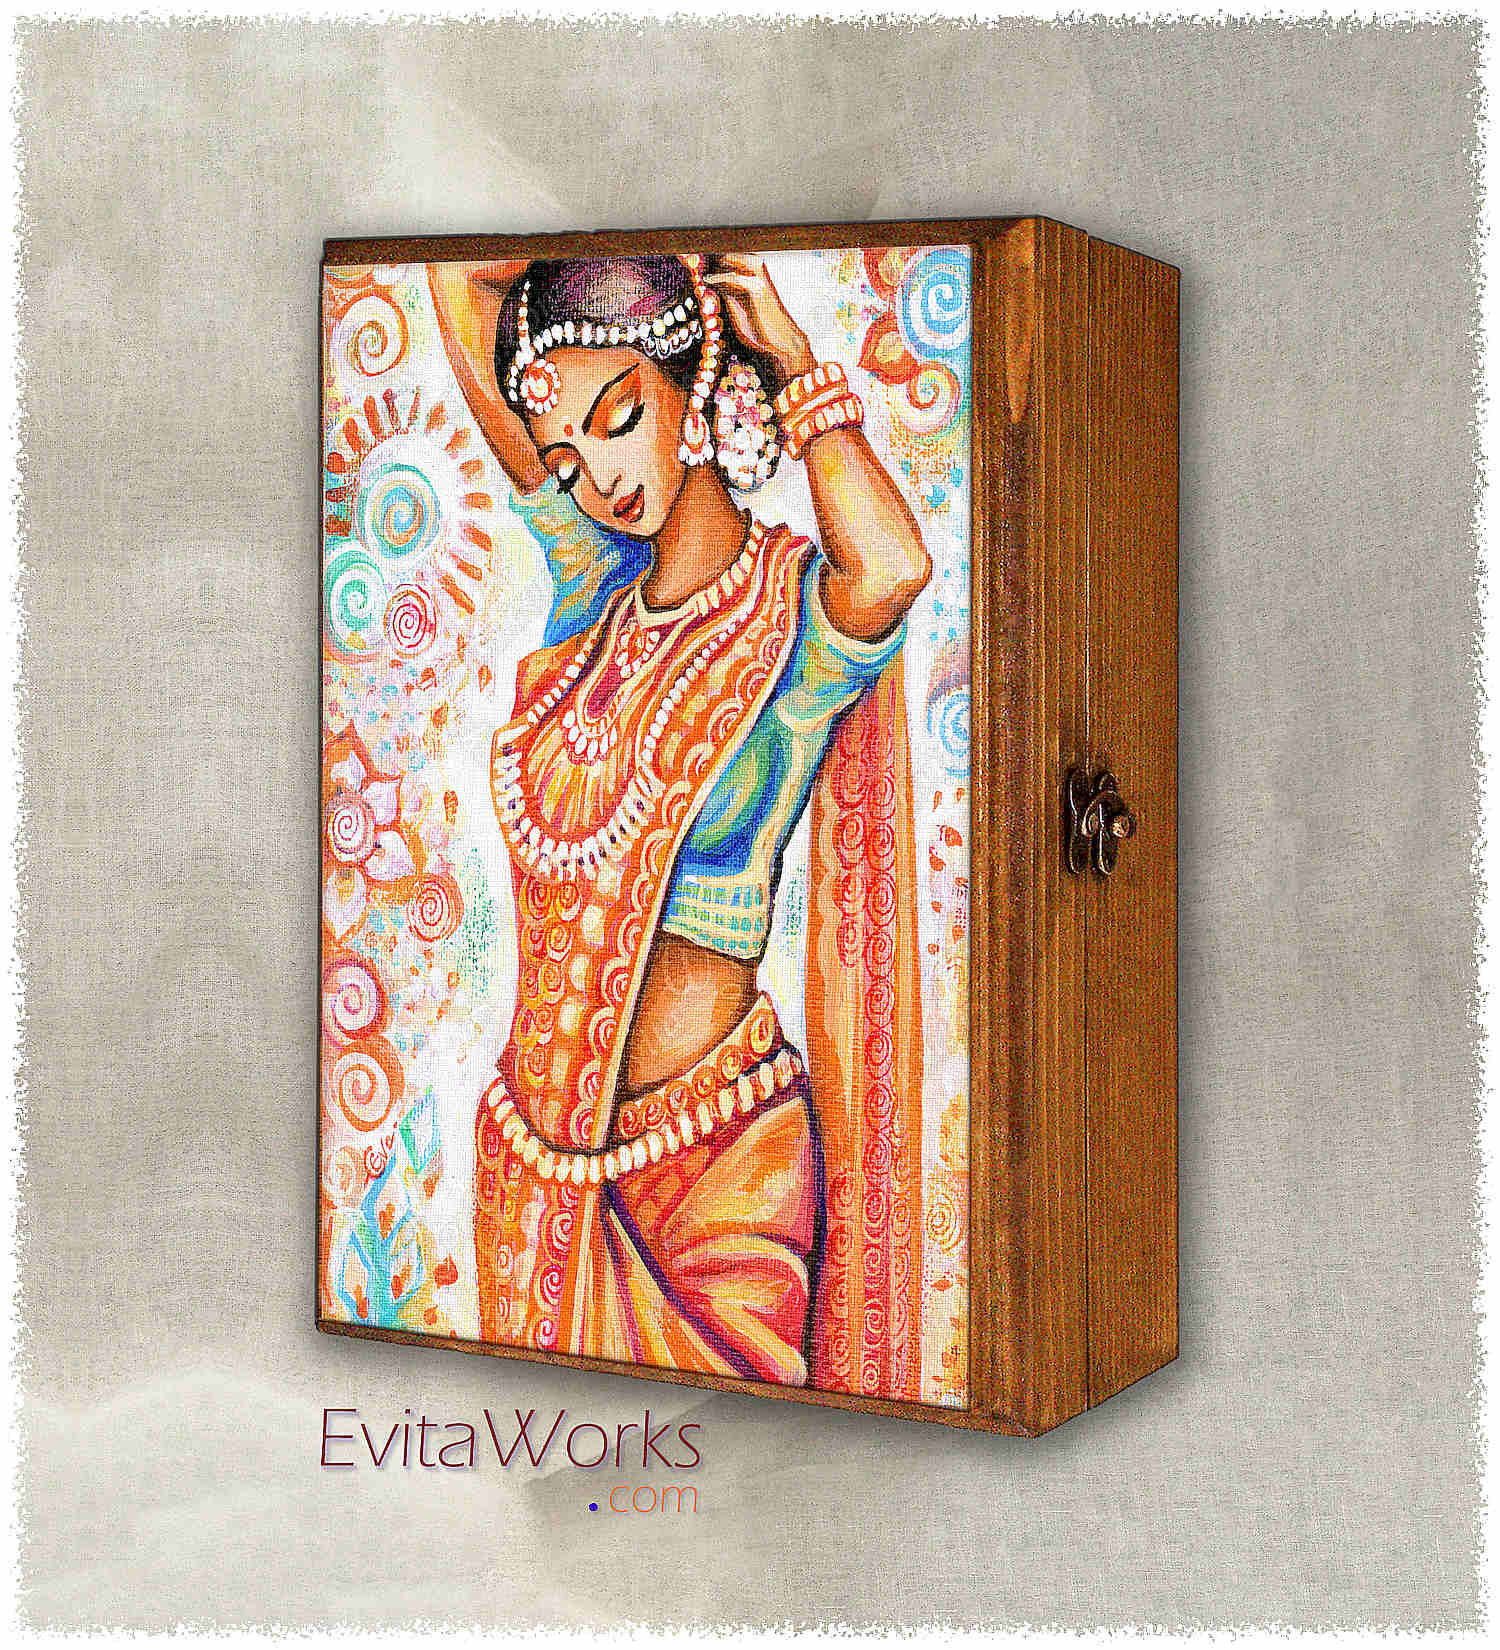 Hit to learn about "Aroma of Saffron, Indian girl" on jewelboxes